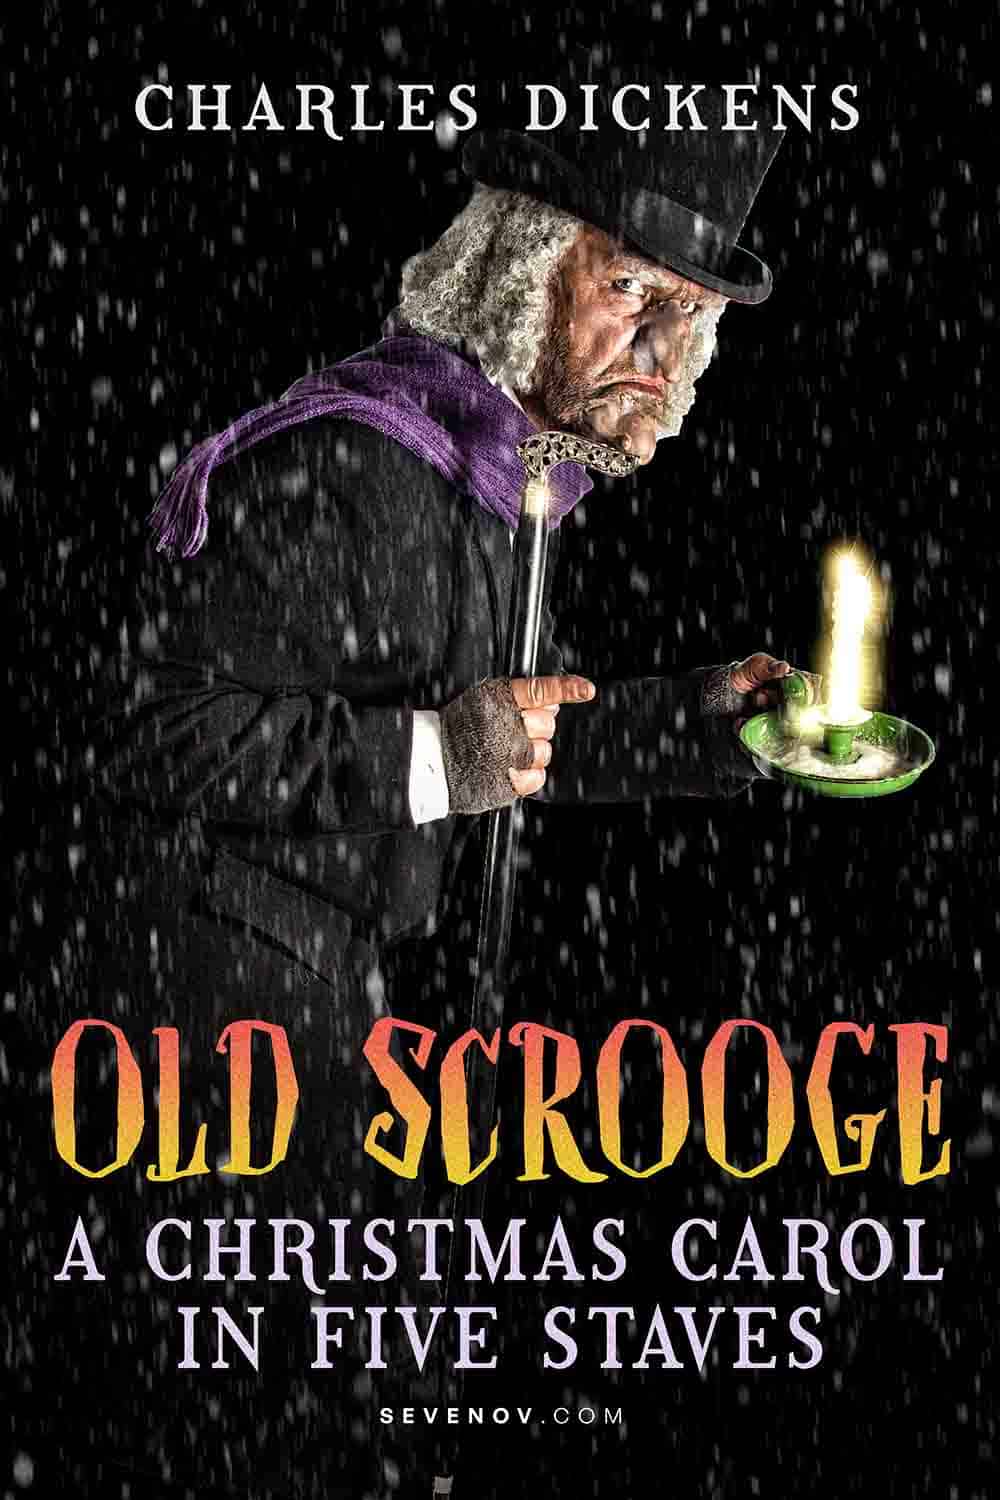 https://pagevio.com/wp-content/uploads/2023/01/old-scrooge-a-christmas-carol-in-five-staves-20220901.jpg